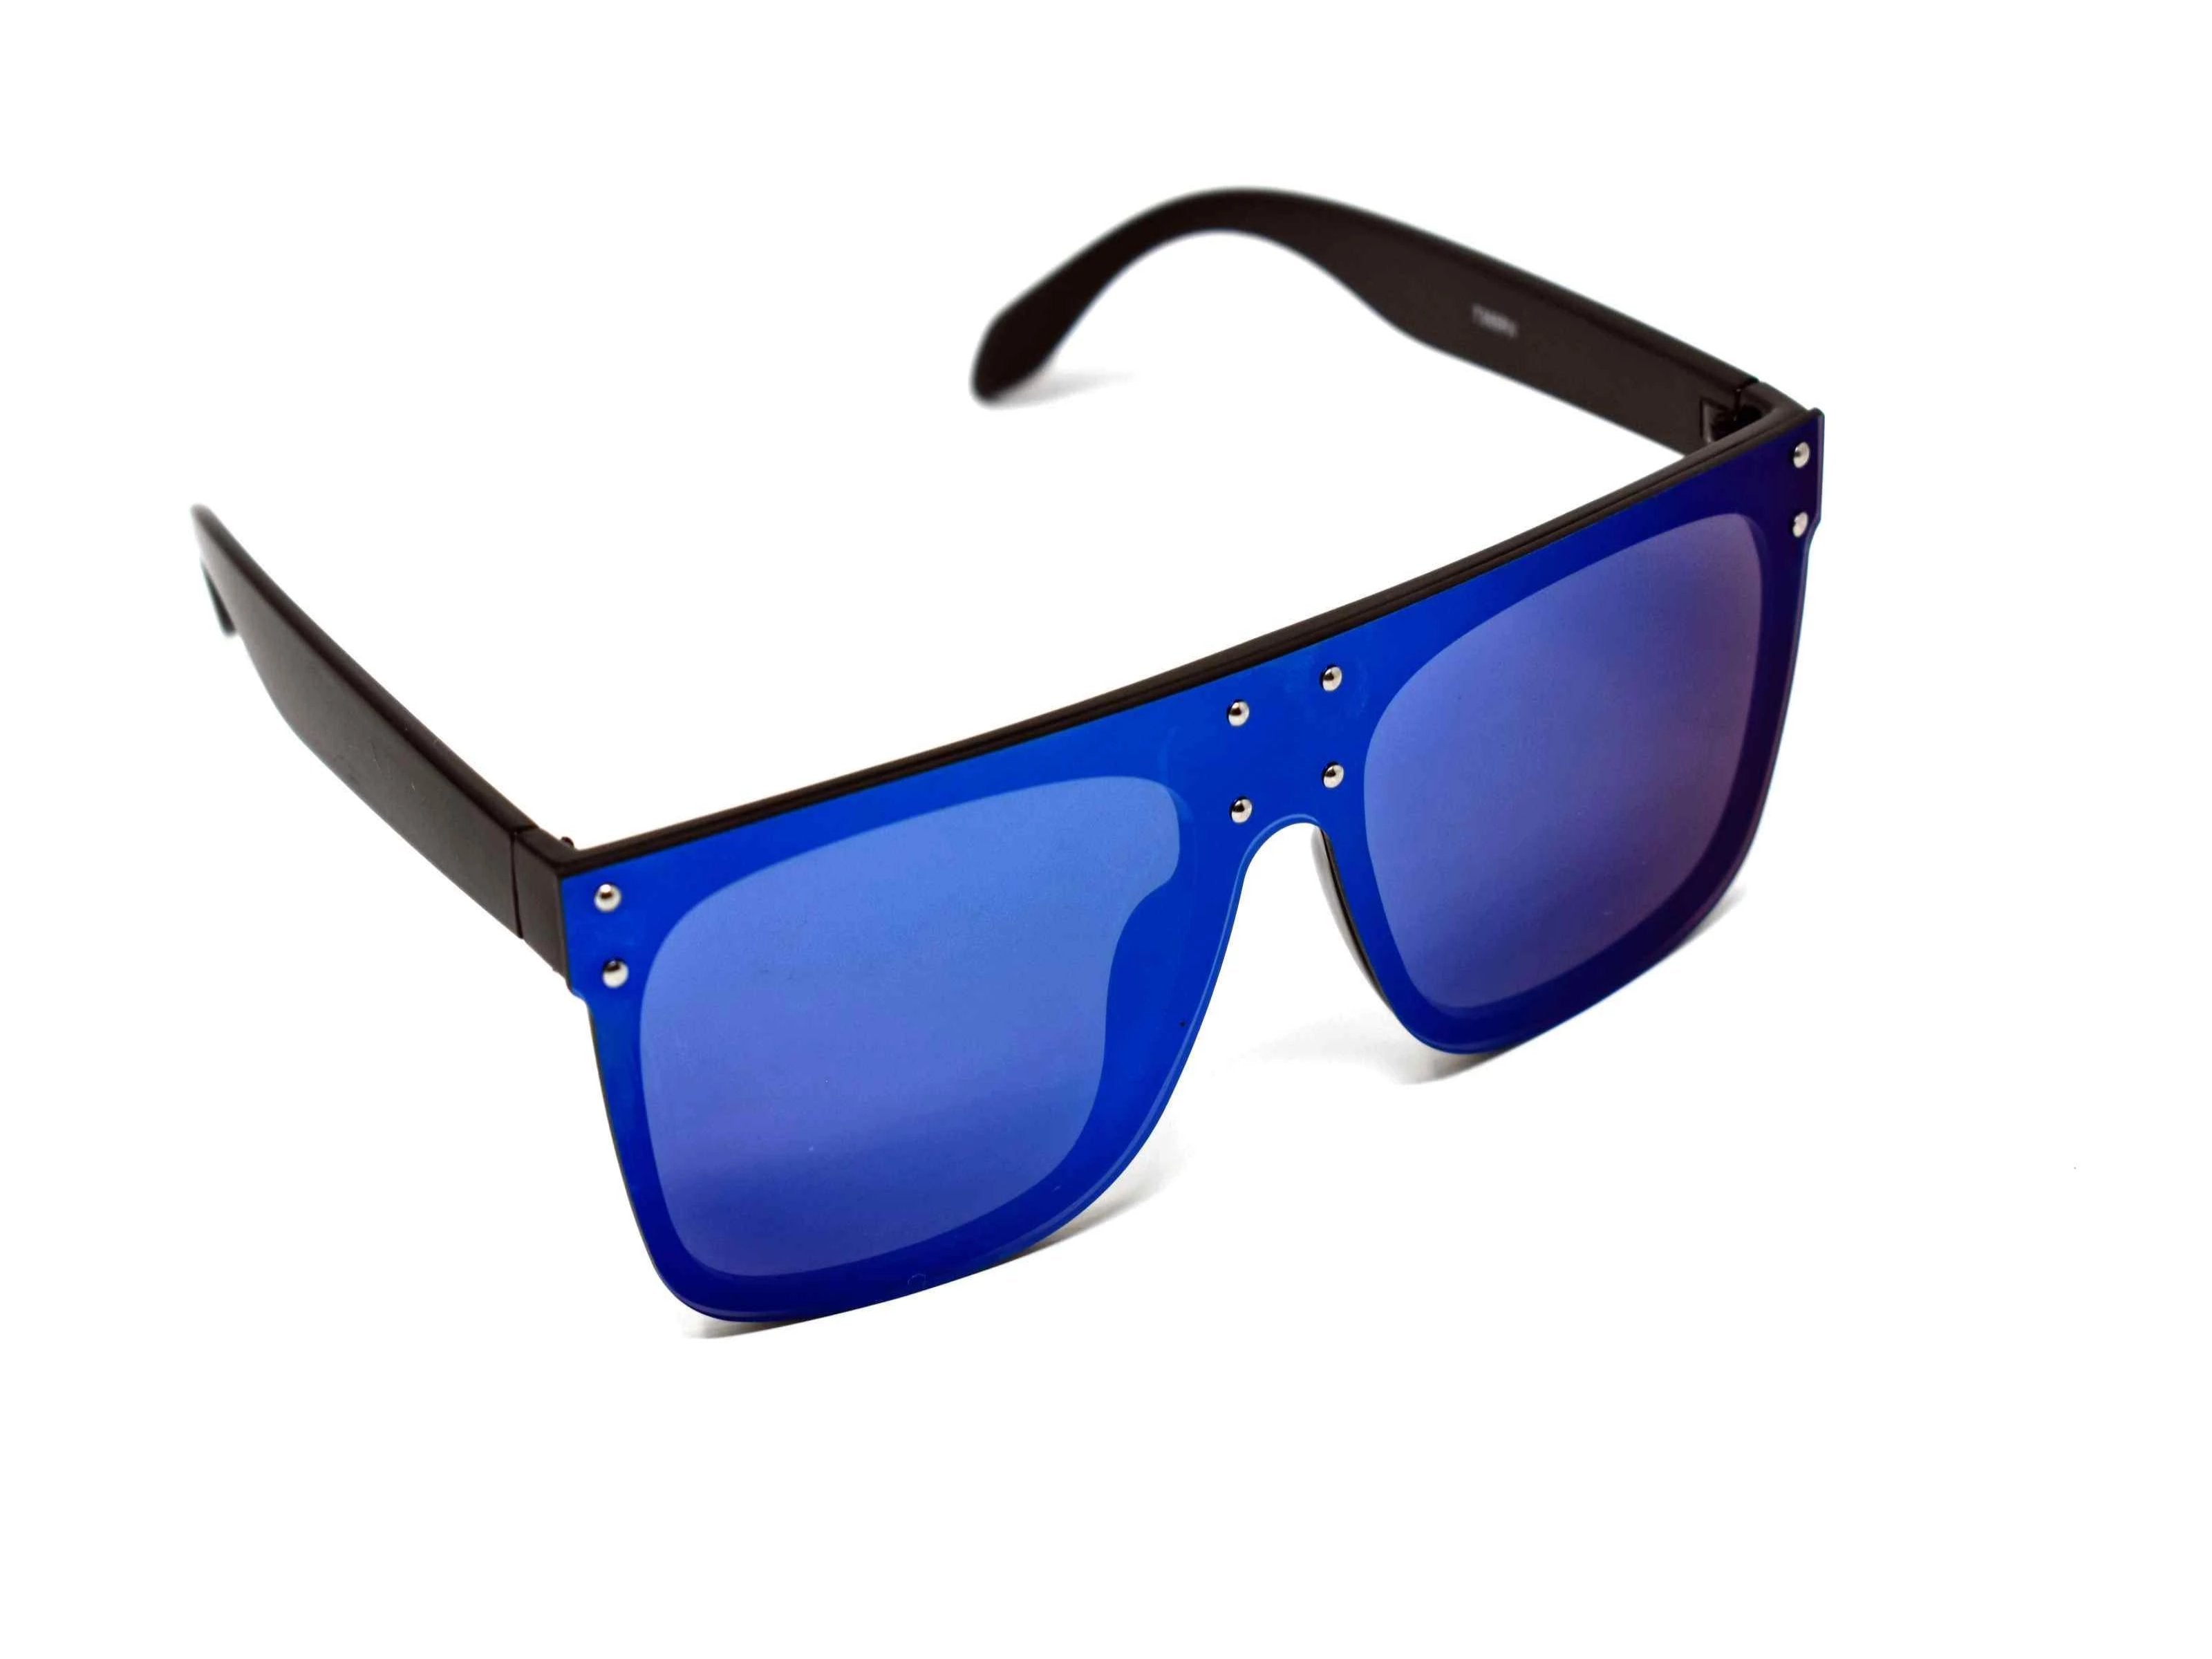 Fashion forward and edgy is what you call our shield shaped Rosa Black framed blue mirrored lens Sunglasses.